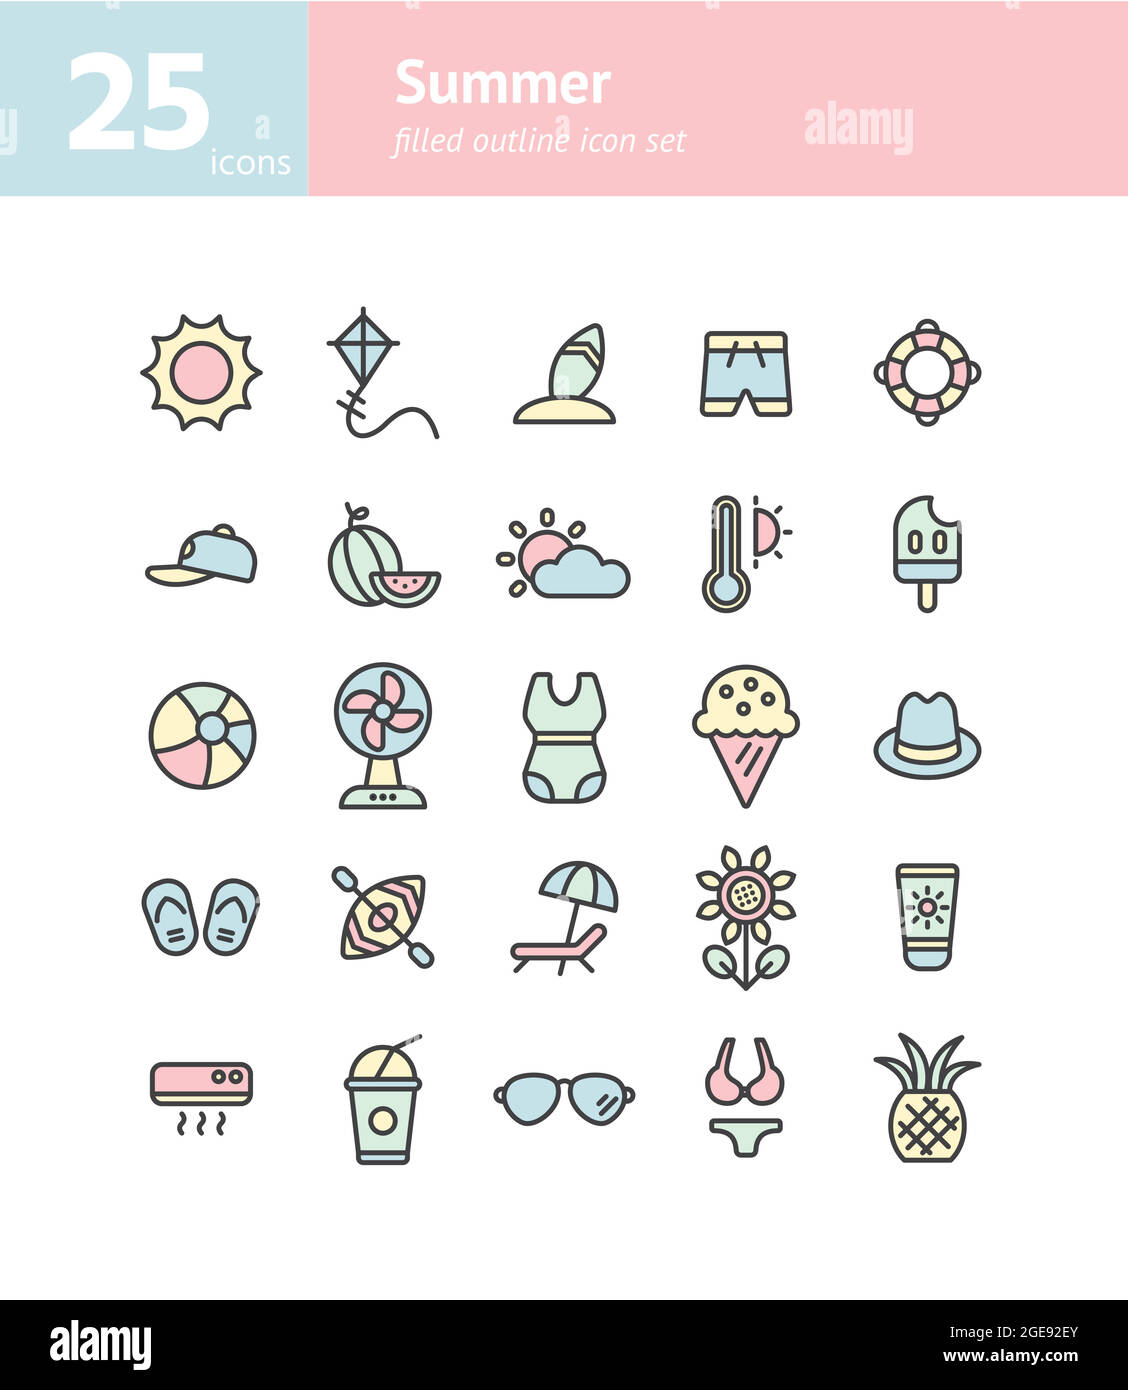 Summer filled outline icon set. Vector and Illustration. Stock Vector